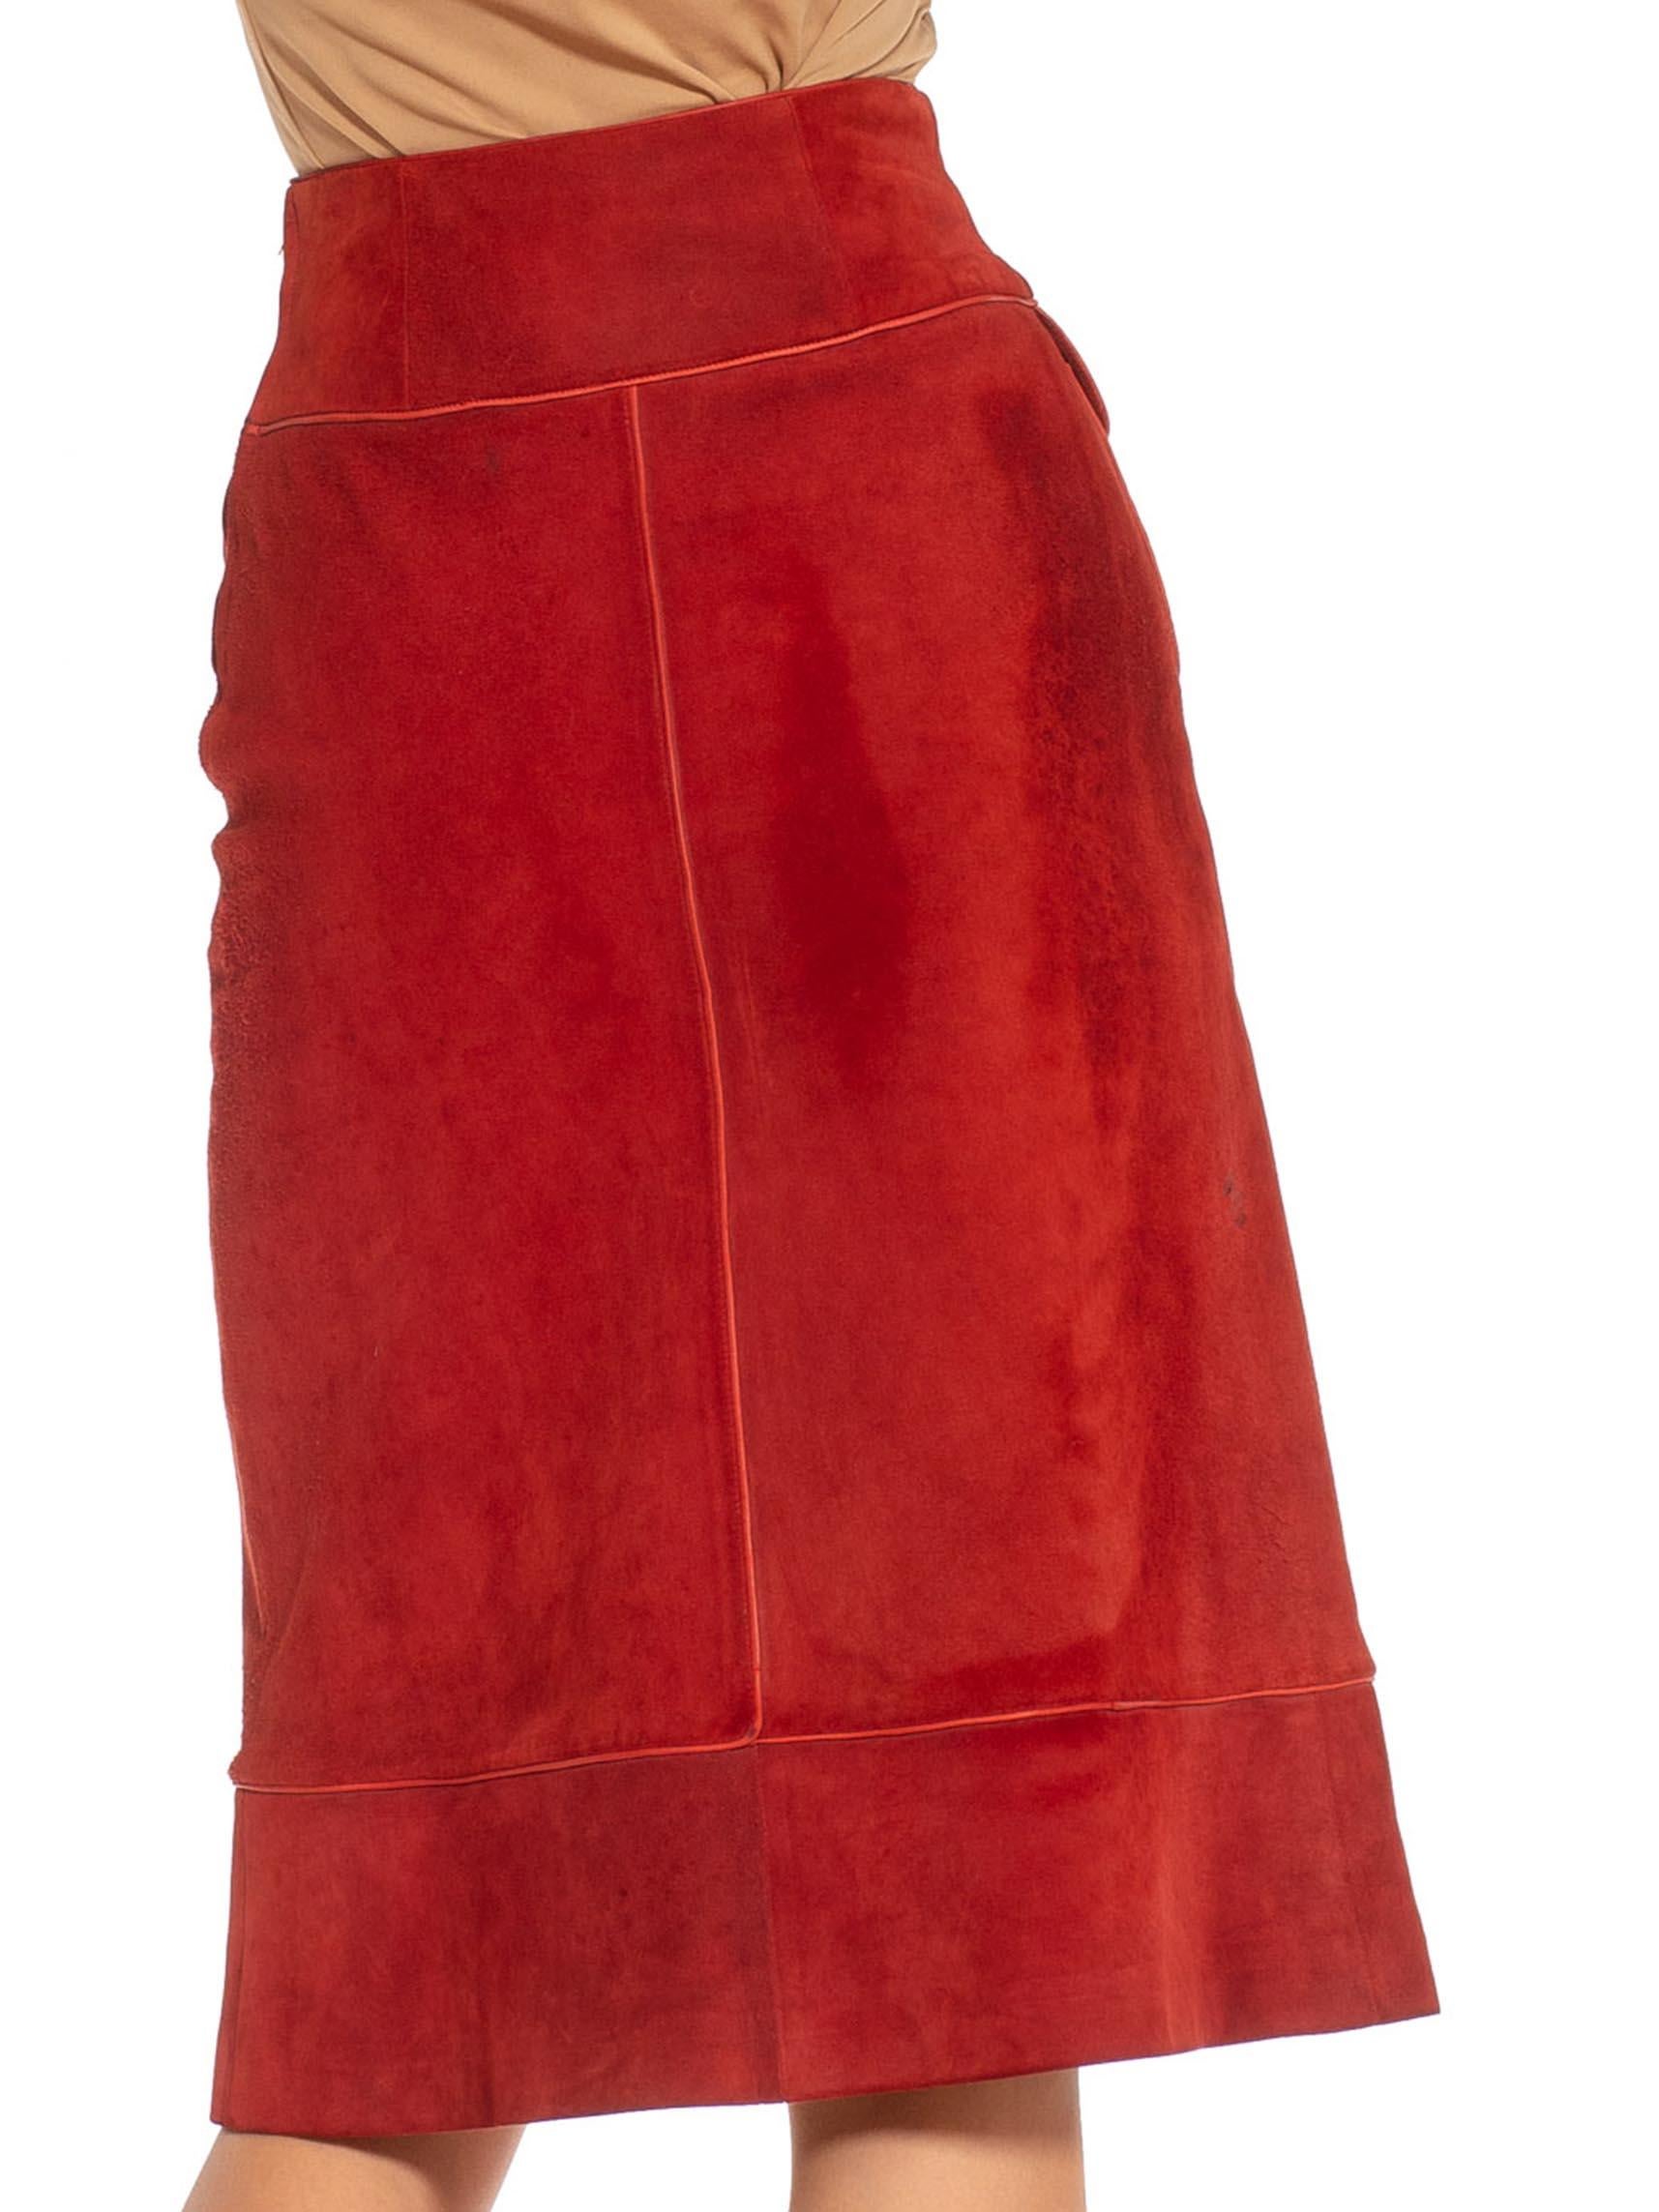 Women's 1990S GUCCI Burgundy & Gold Suede Midi Buckle Skirt